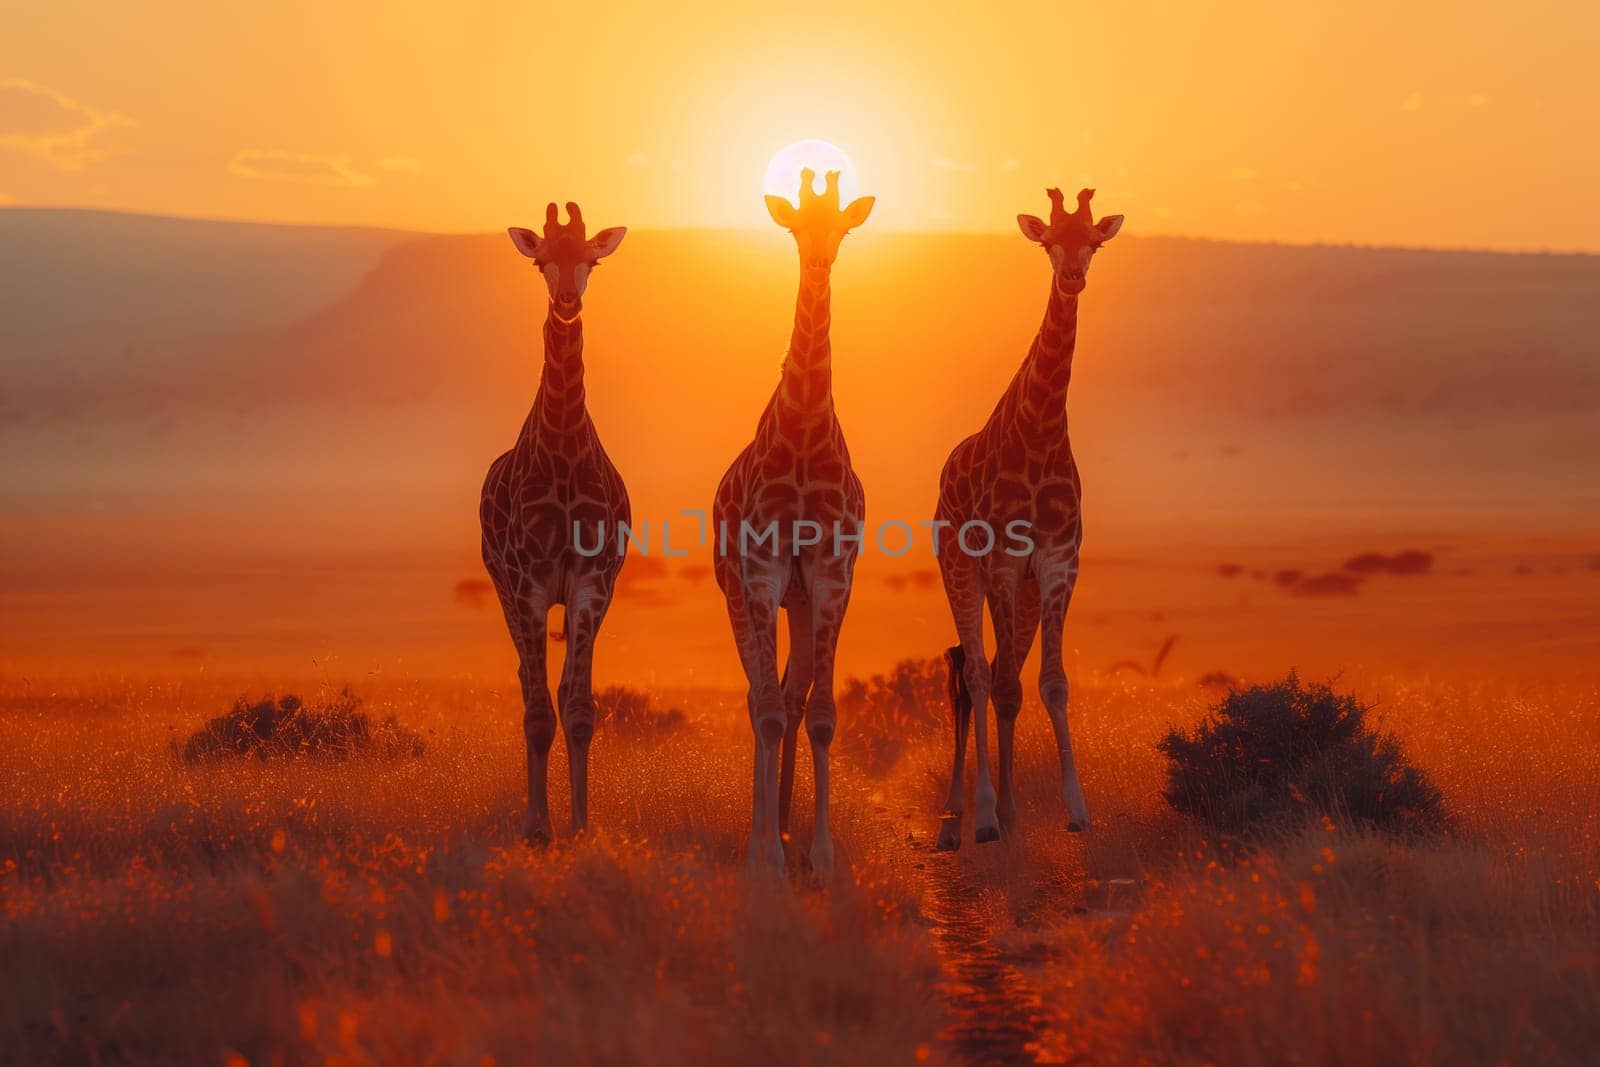 Three giraffes are gracefully standing in a grassland field, silhouetted against the beautiful sunset sky. Their adaptation to the terrestrial environment is evident